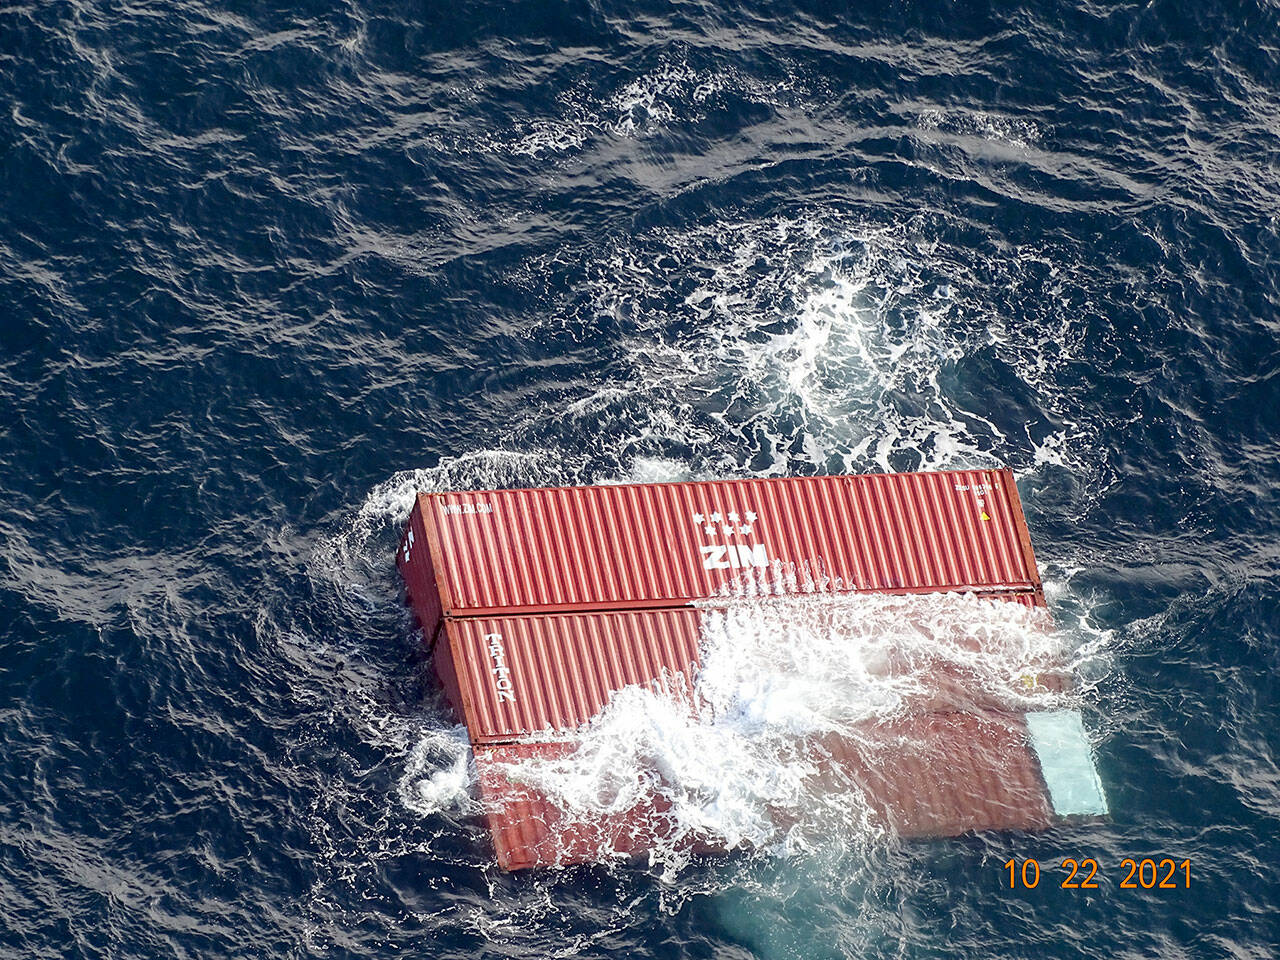 A group of three linked shipping containers from the MV Zim Kingston were photographed when they were spotted by a Port Angeles helicopter crew on Friday. (U.S. Coast Guard)